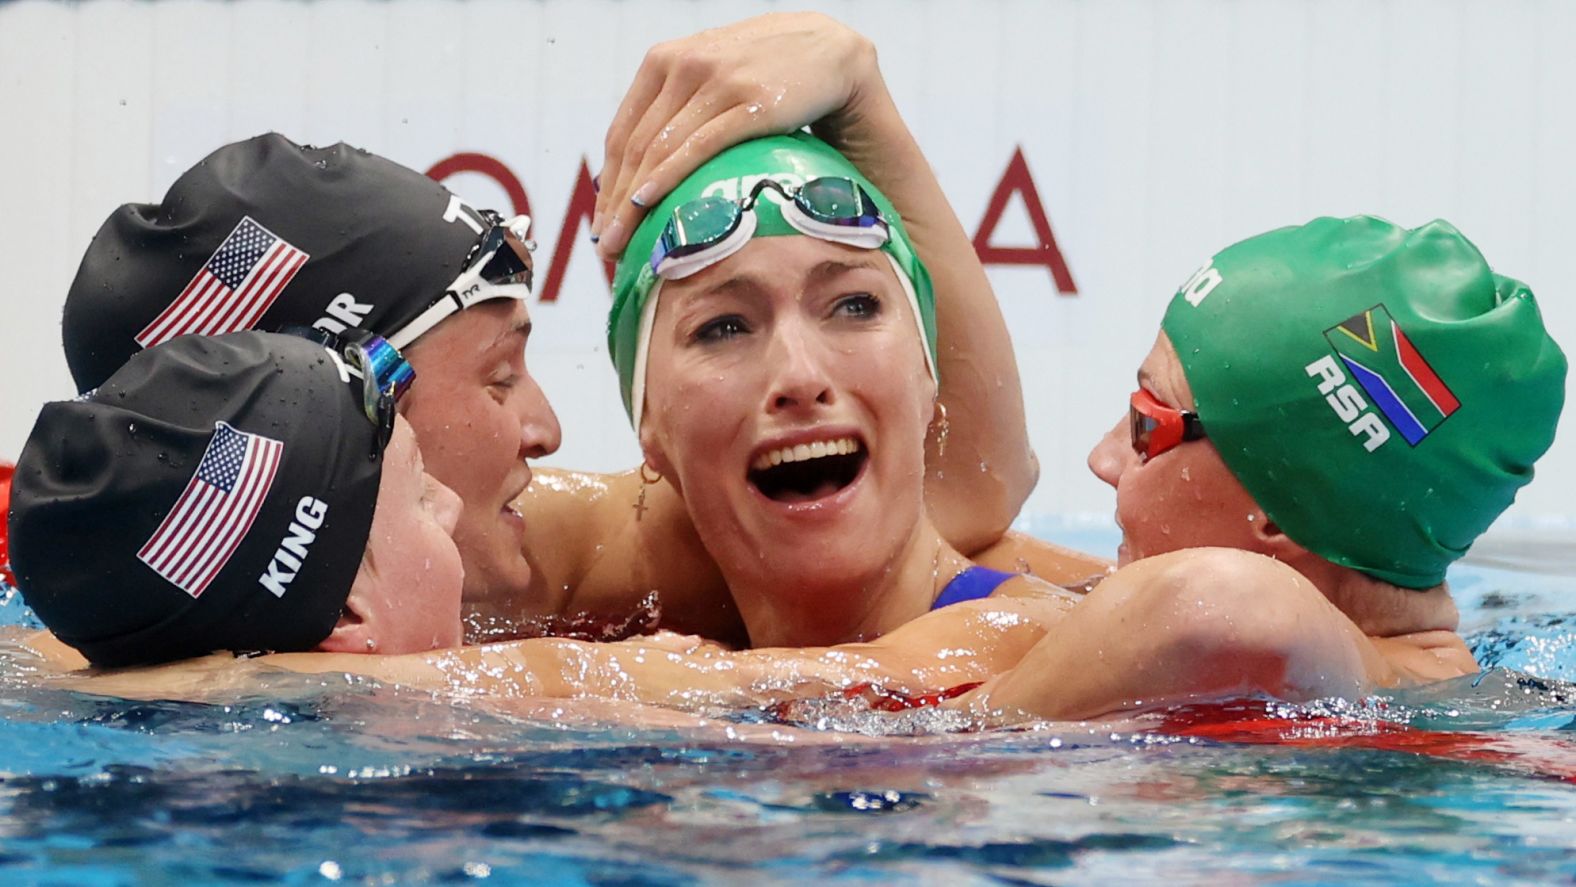 South African swimmer Tatjana Schoenmaker is congratulated by some of her fellow competitors — from left, American Lilly King, American Annie Lazor and South African Kaylene Corbett — after <a href="index.php?page=&url=https%3A%2F%2Fwww.cnn.com%2Fworld%2Flive-news%2Ftokyo-2020-olympics-07-29-21-spt%2Fh_5fc36626ed162977a9a007f5febace8b" target="_blank">winning gold in the 200-meter breaststroke</a> on July 30. She broke the world record, finishing with a time of 2:18.95.